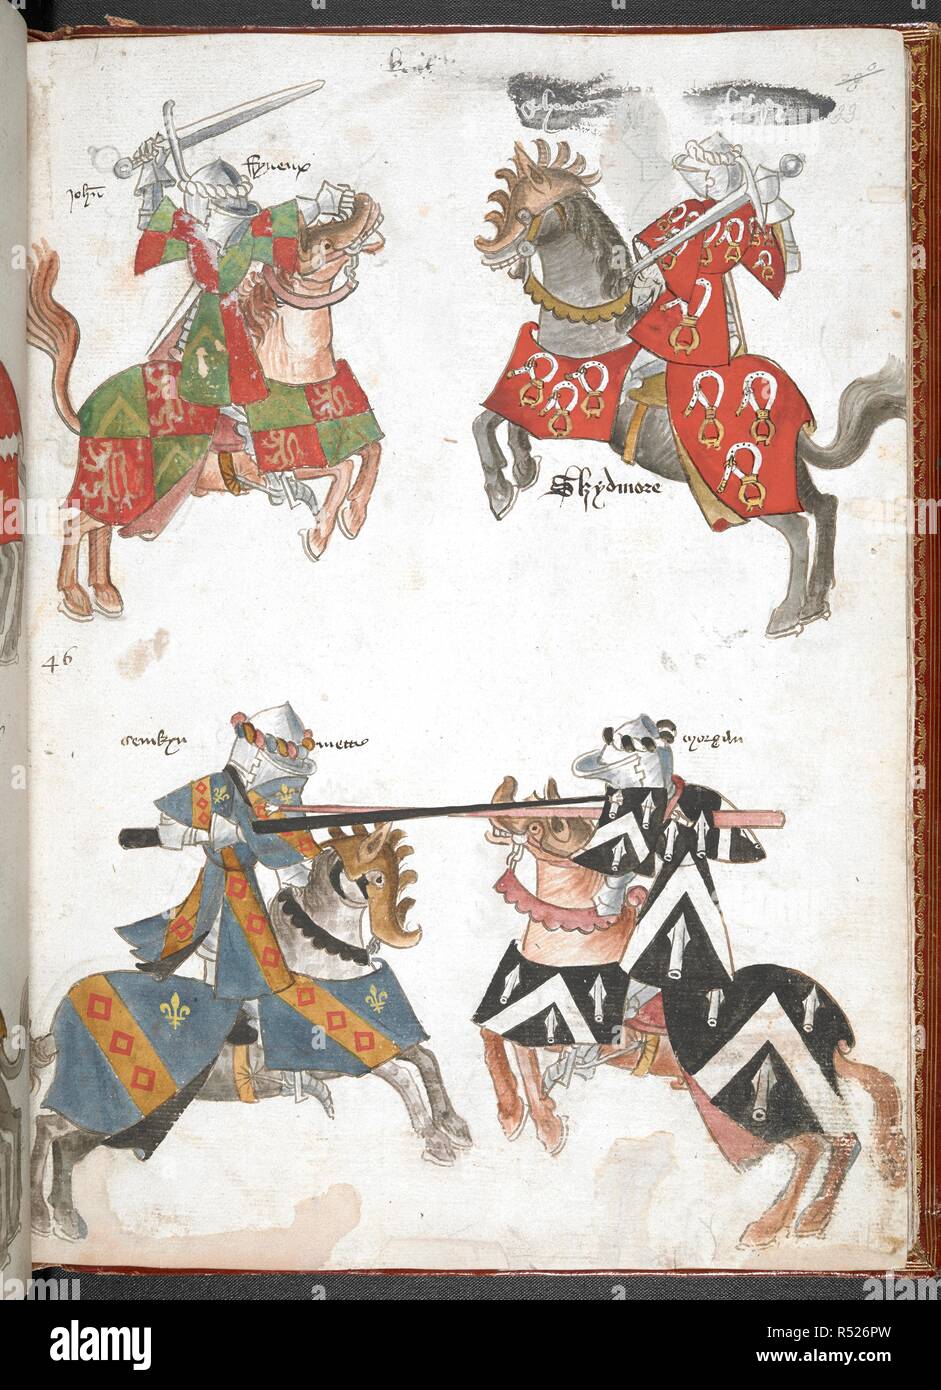 Knights jousting. Military Roll of Arms (manuscript also known as Sir Thomas Holme's Book of Arms). Part 2 ff. 9-40v. England, S. E. (probably London). Before 1448, c. 1446. Numerous coloured drawings of combatant mounted knights in armour and tabard. Source: Harley 4205 f.33. Language: Gothic cursive. Stock Photo